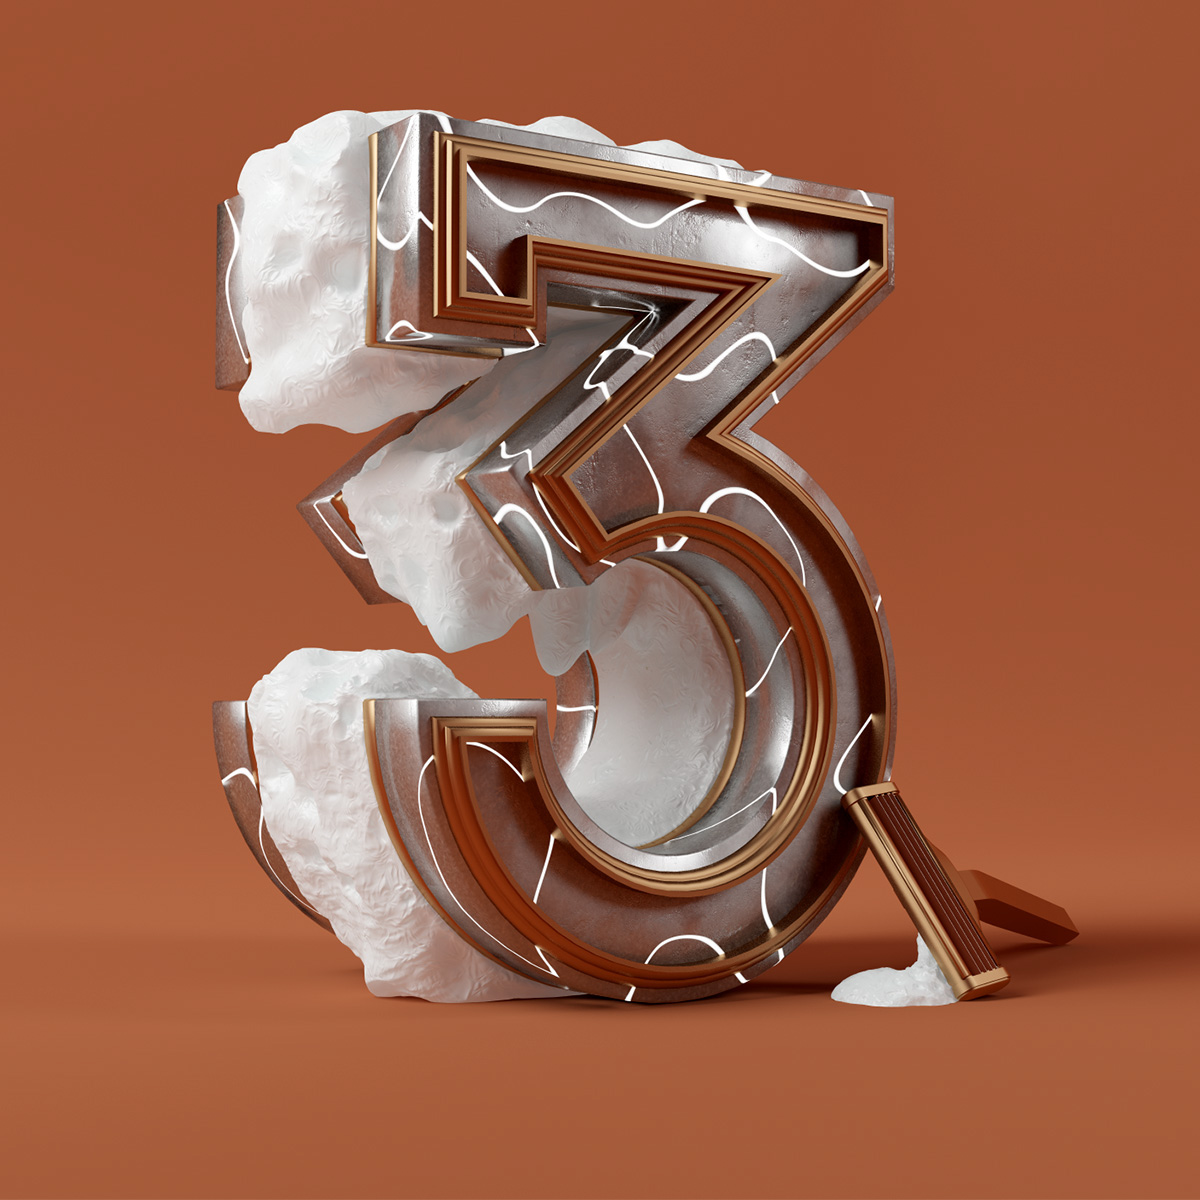 type 3dtypography 36daysoftype graphicdesign vray CGI 3D rdn font Typeface